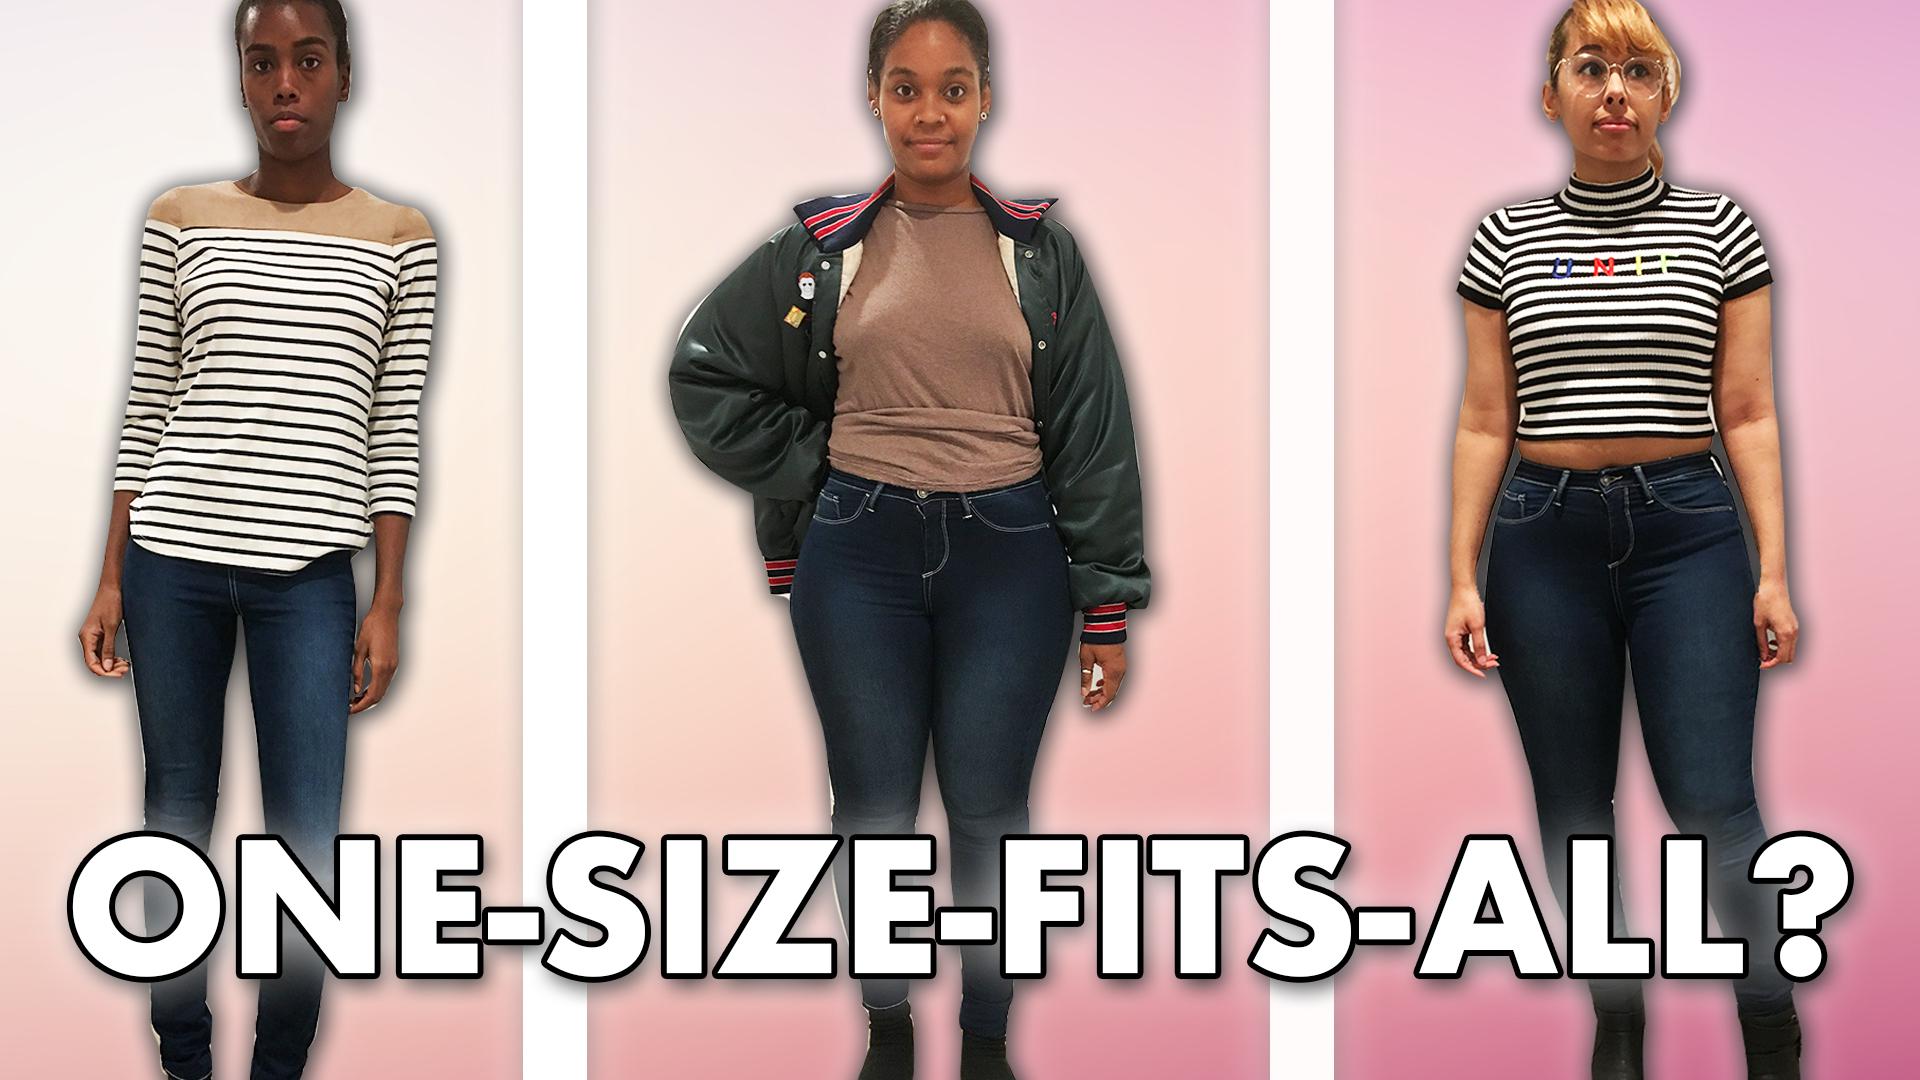 Women Try One-Size-Fits-All Jeans